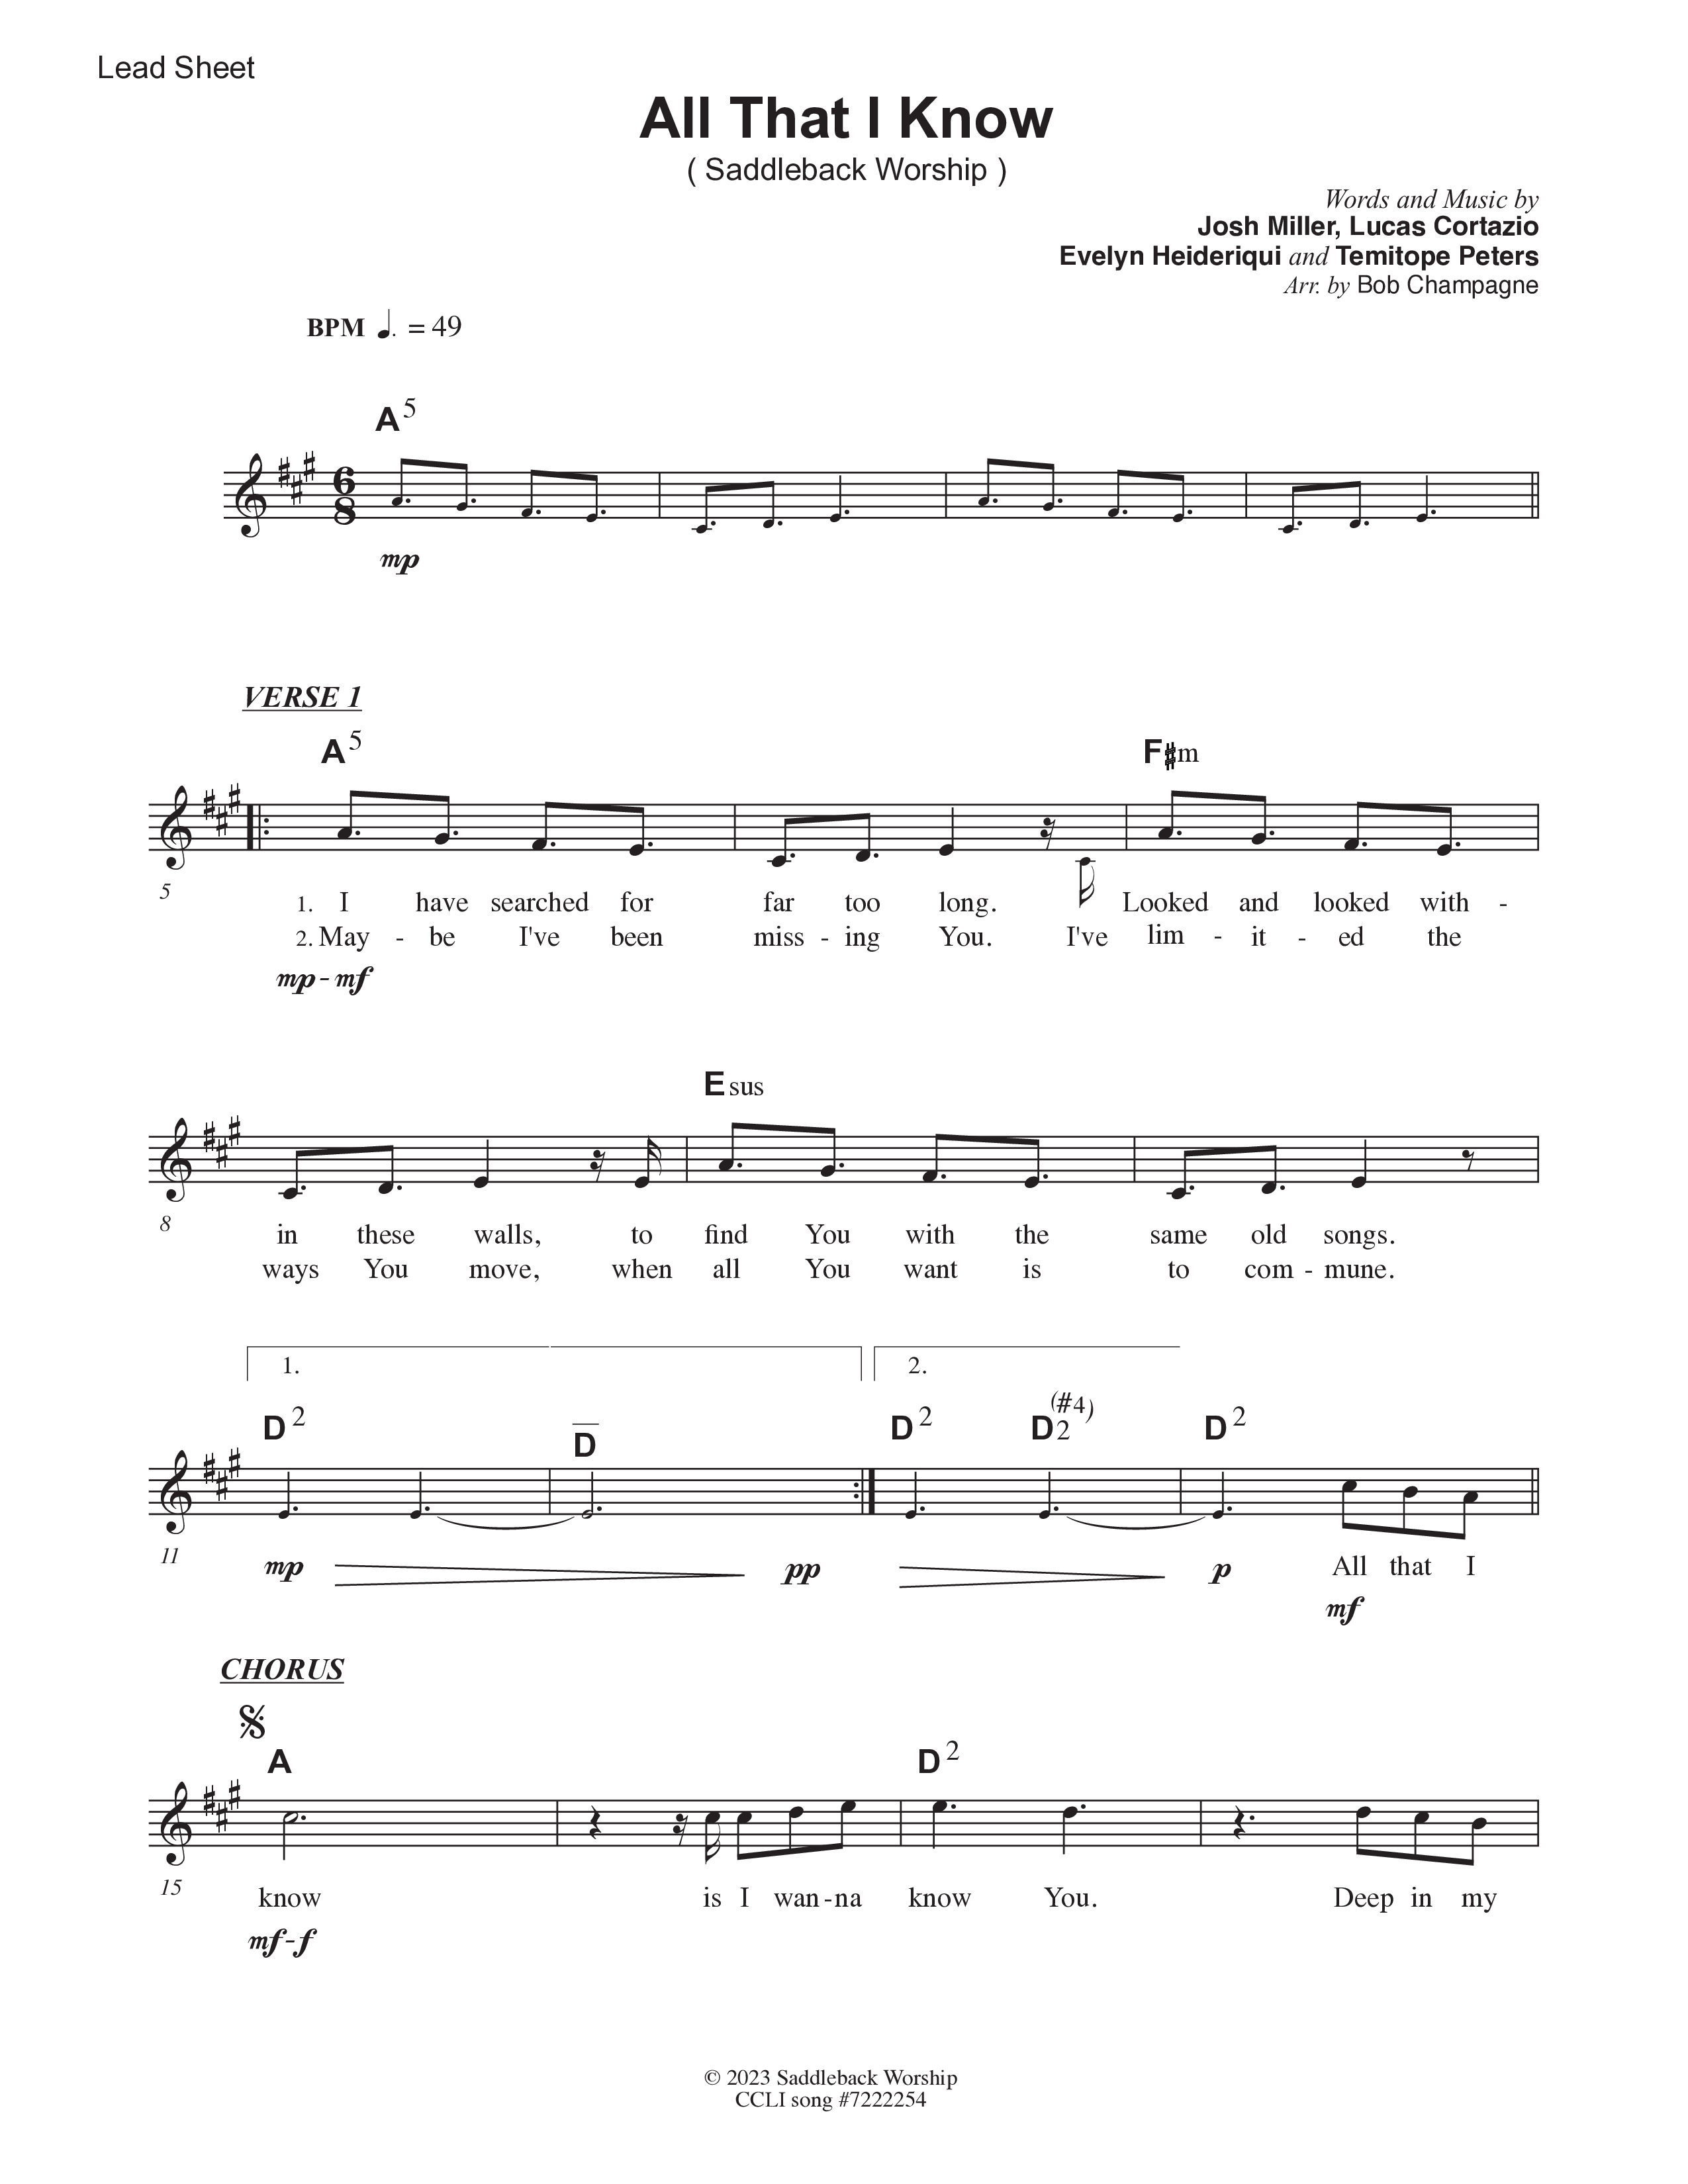 All That I Know (Live) Lead Sheet Melody (Saddleback Worship)